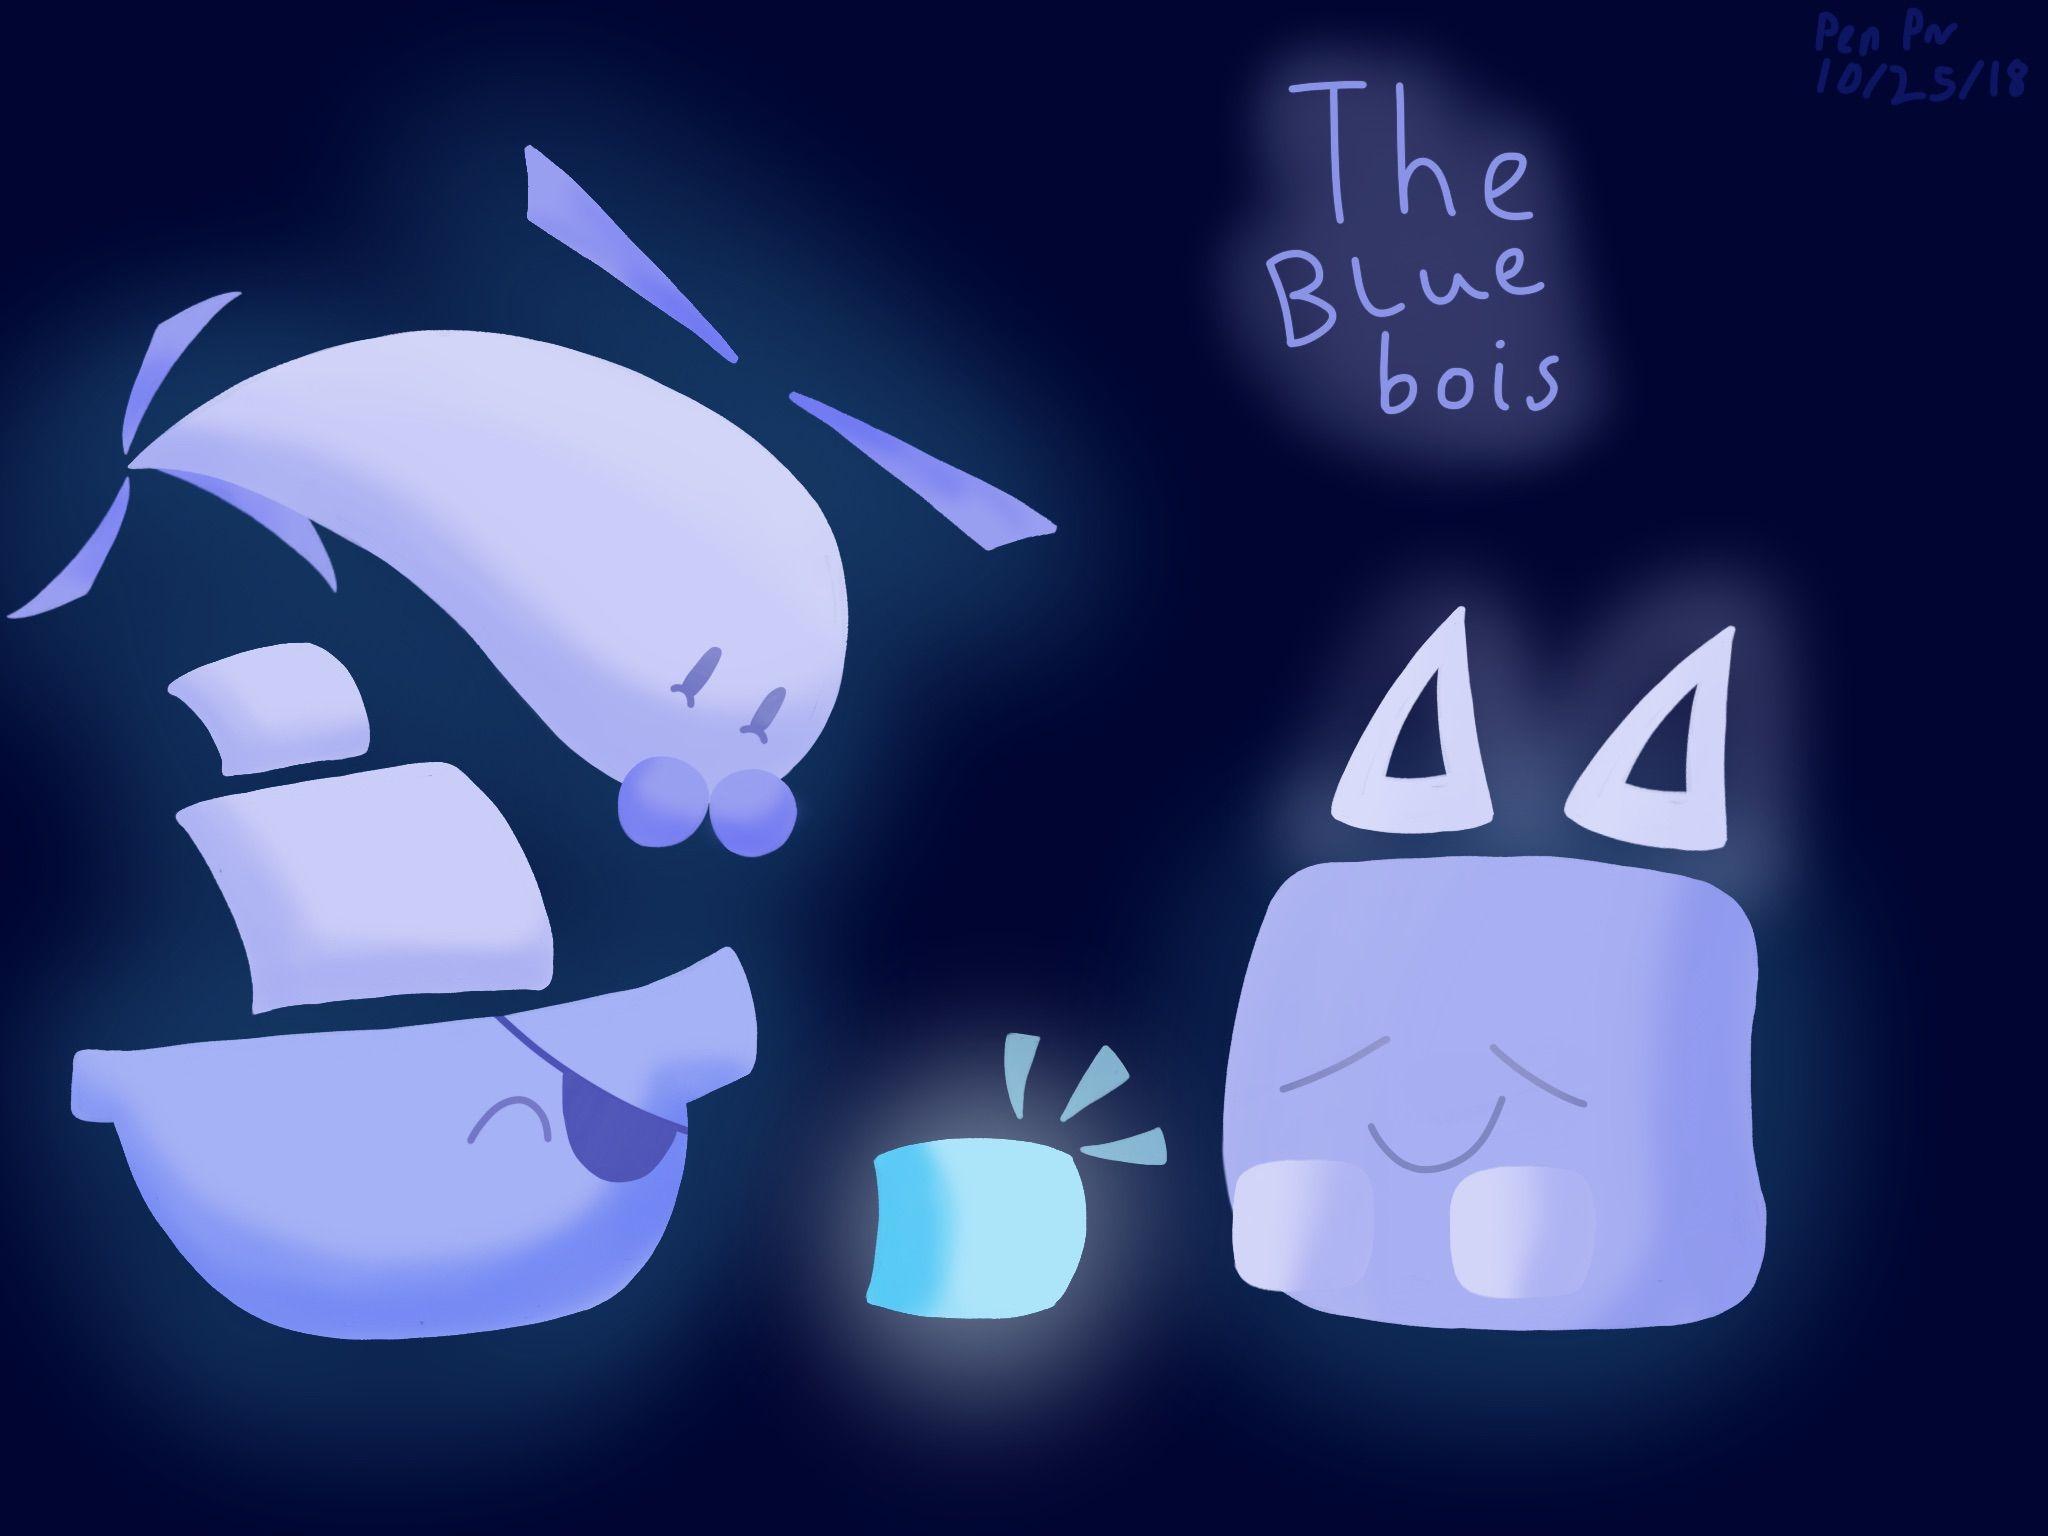 blu bois from just shapes and beats by penpie on Newgrounds